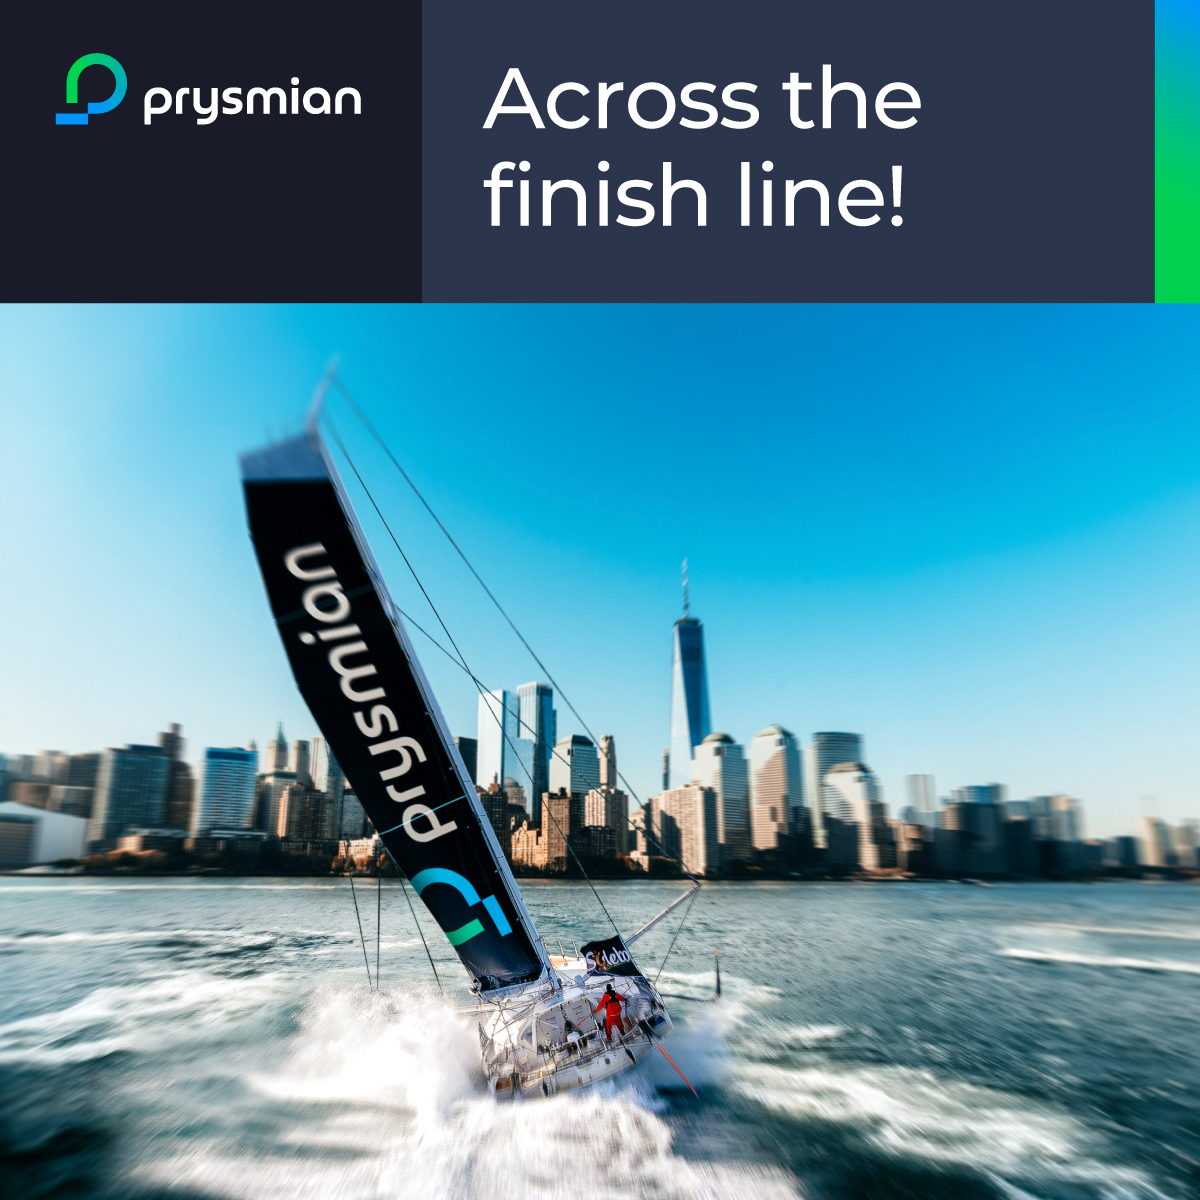 After 11 days, 10 hours and 37 minutes of non-stop solo navigation, Giancarlo Pedote has crossed the Transat CIC finish line aboard the Prysmian IMOCA! The France-New York transatlantic route presented challenges, but Giancarlo's unwavering determination propelled him through…